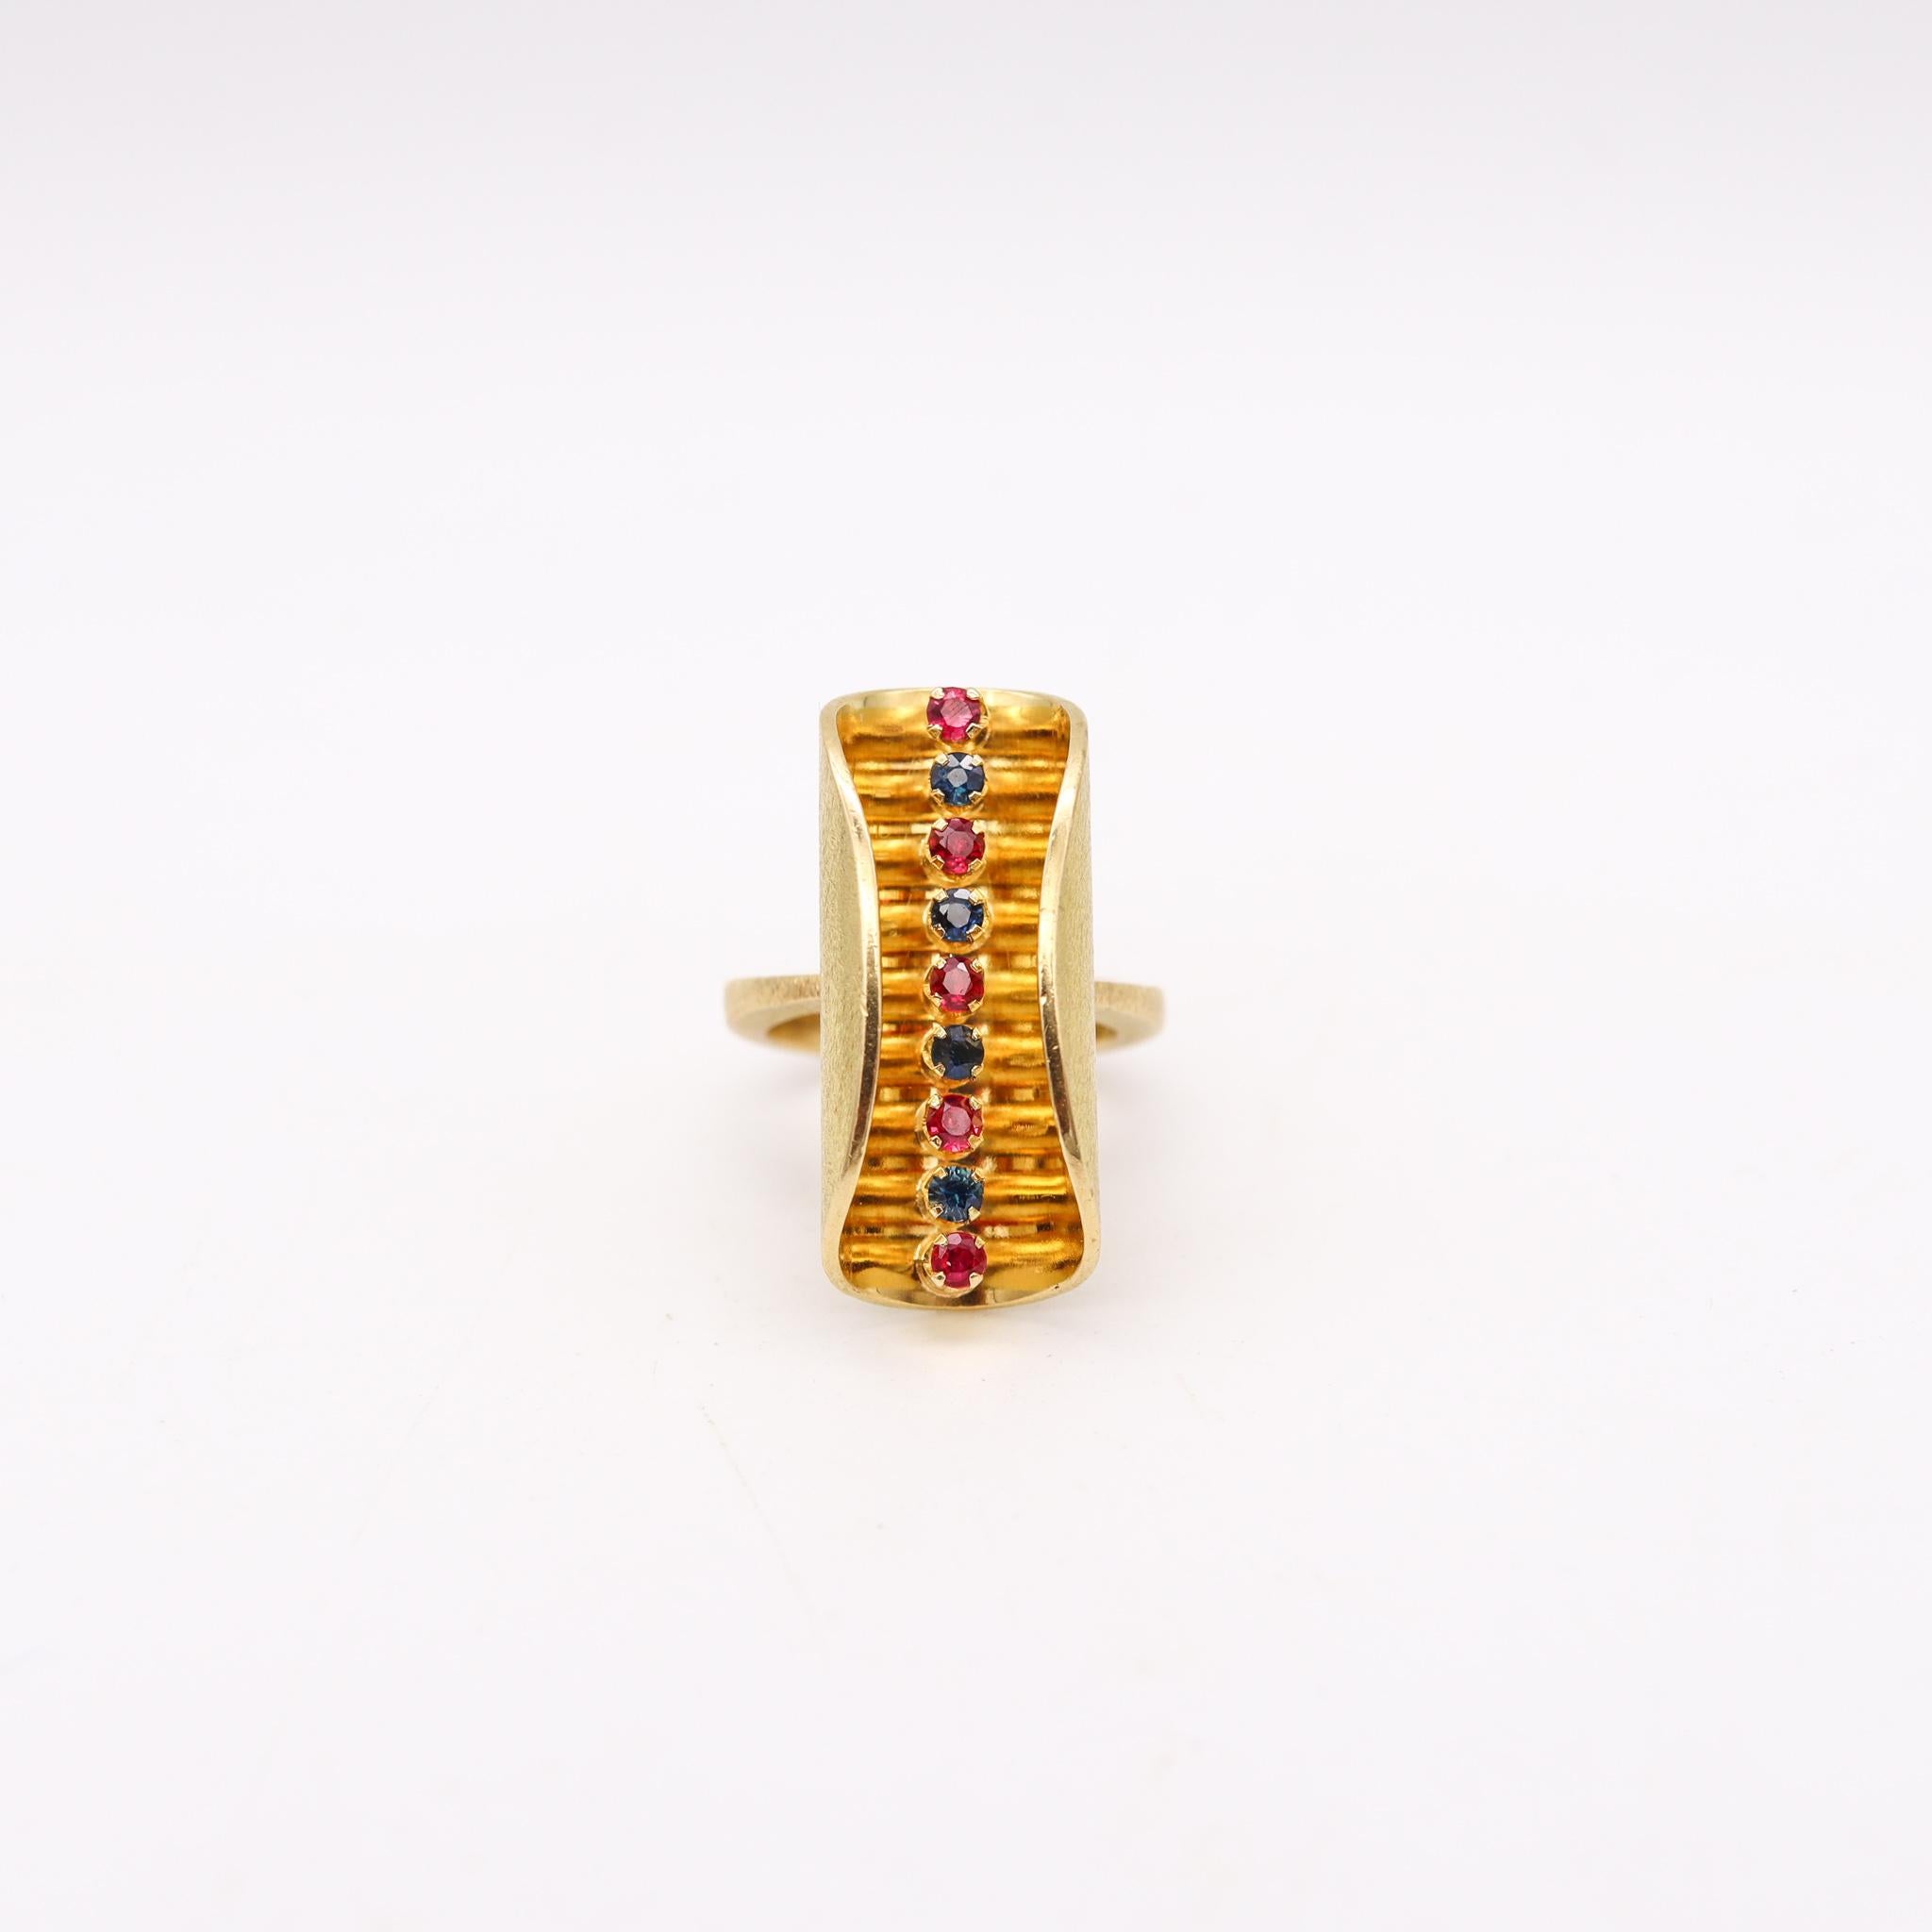 Modernist Op-Art sculptural ring.

A sculptural wearable piece of Scandinavian modern art, created in the northern European region, back in the 1970. This beautiful ring has been most probably made in Denmark and it was carefully crafted in solid